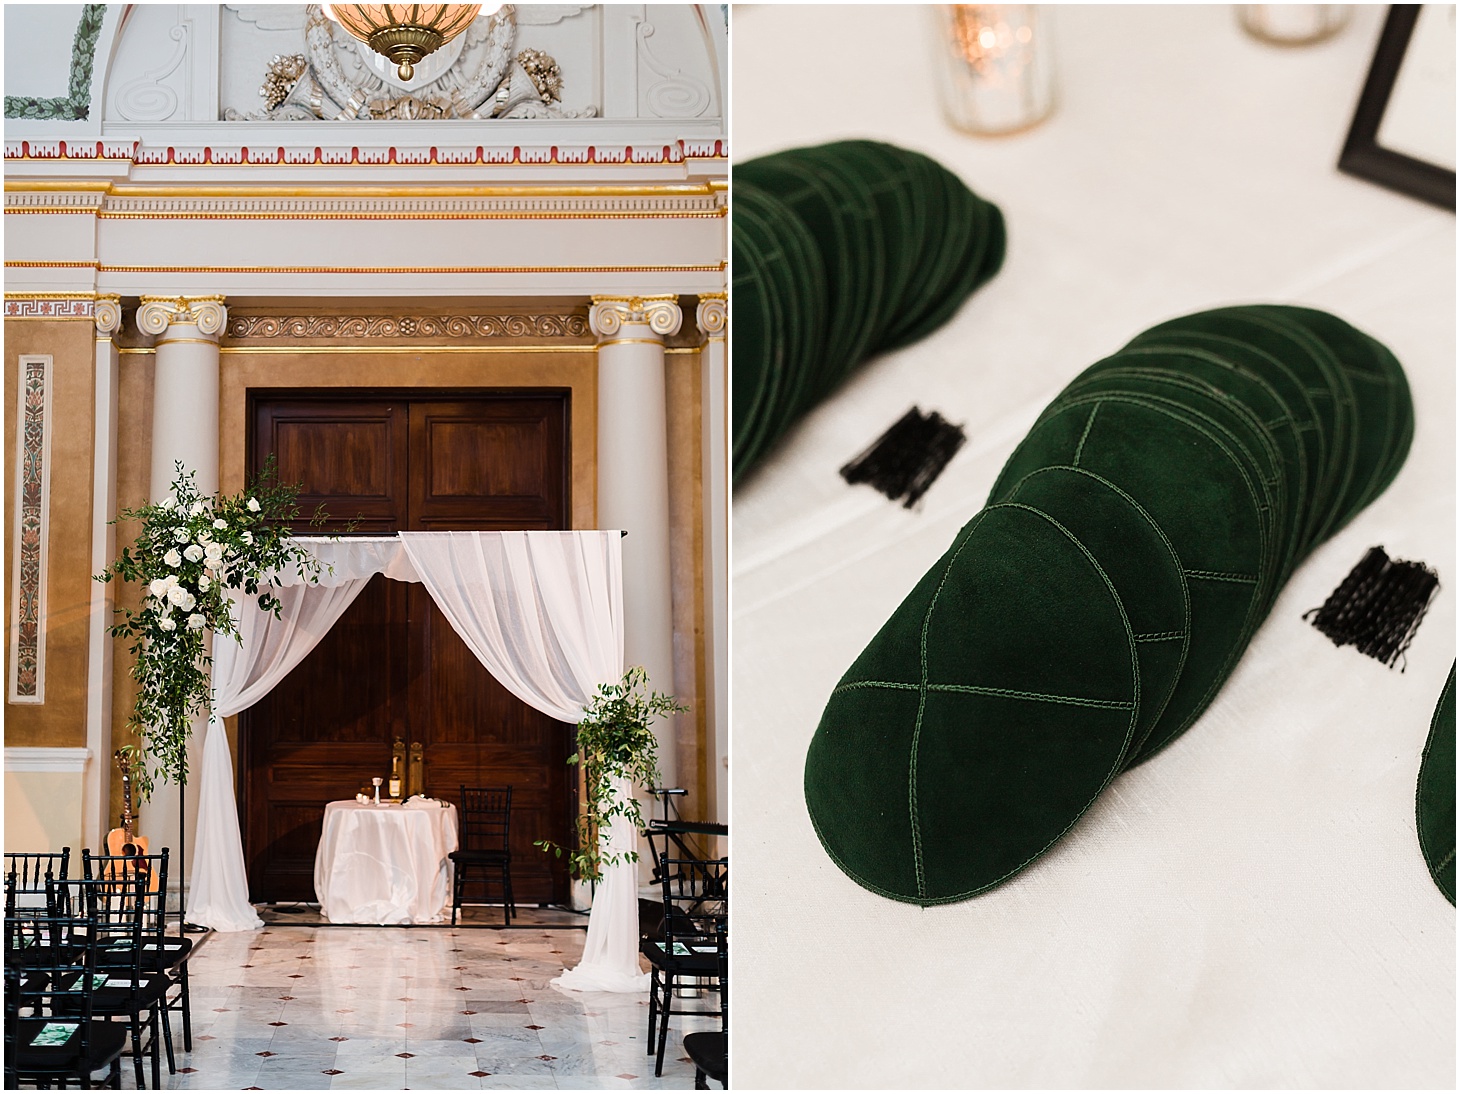 Wedding Ceremony in Presidential Suite at Union Station, Hexagon-Inspired Emerald Wedding at Union Station in Washington DC, Sarah Bradshaw Photography